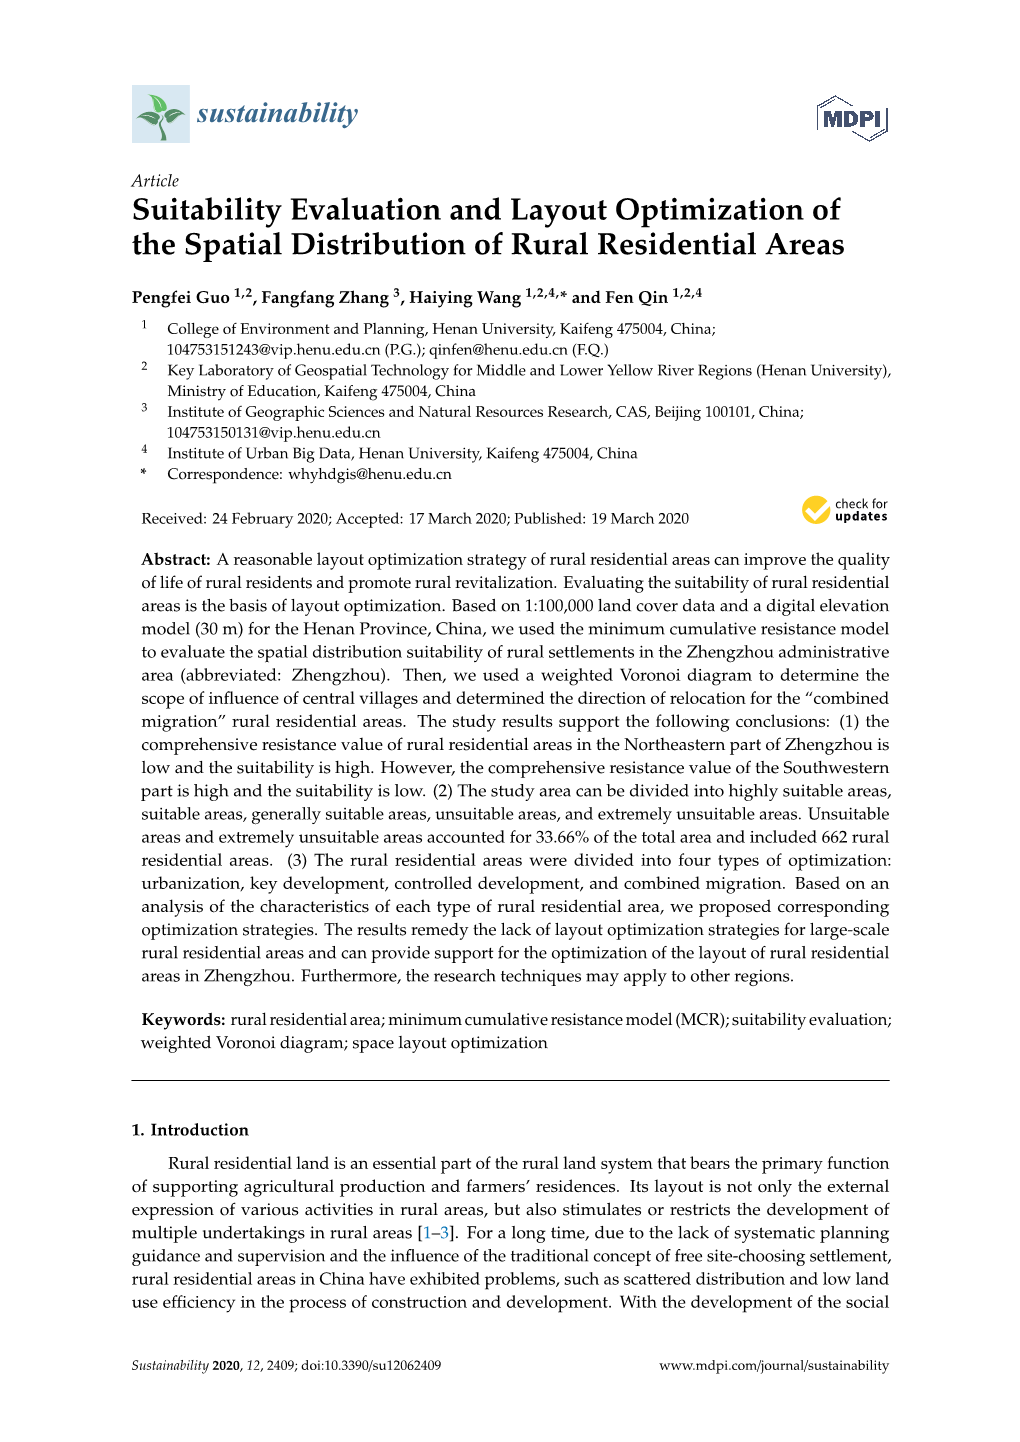 Suitability Evaluation and Layout Optimization of the Spatial Distribution of Rural Residential Areas